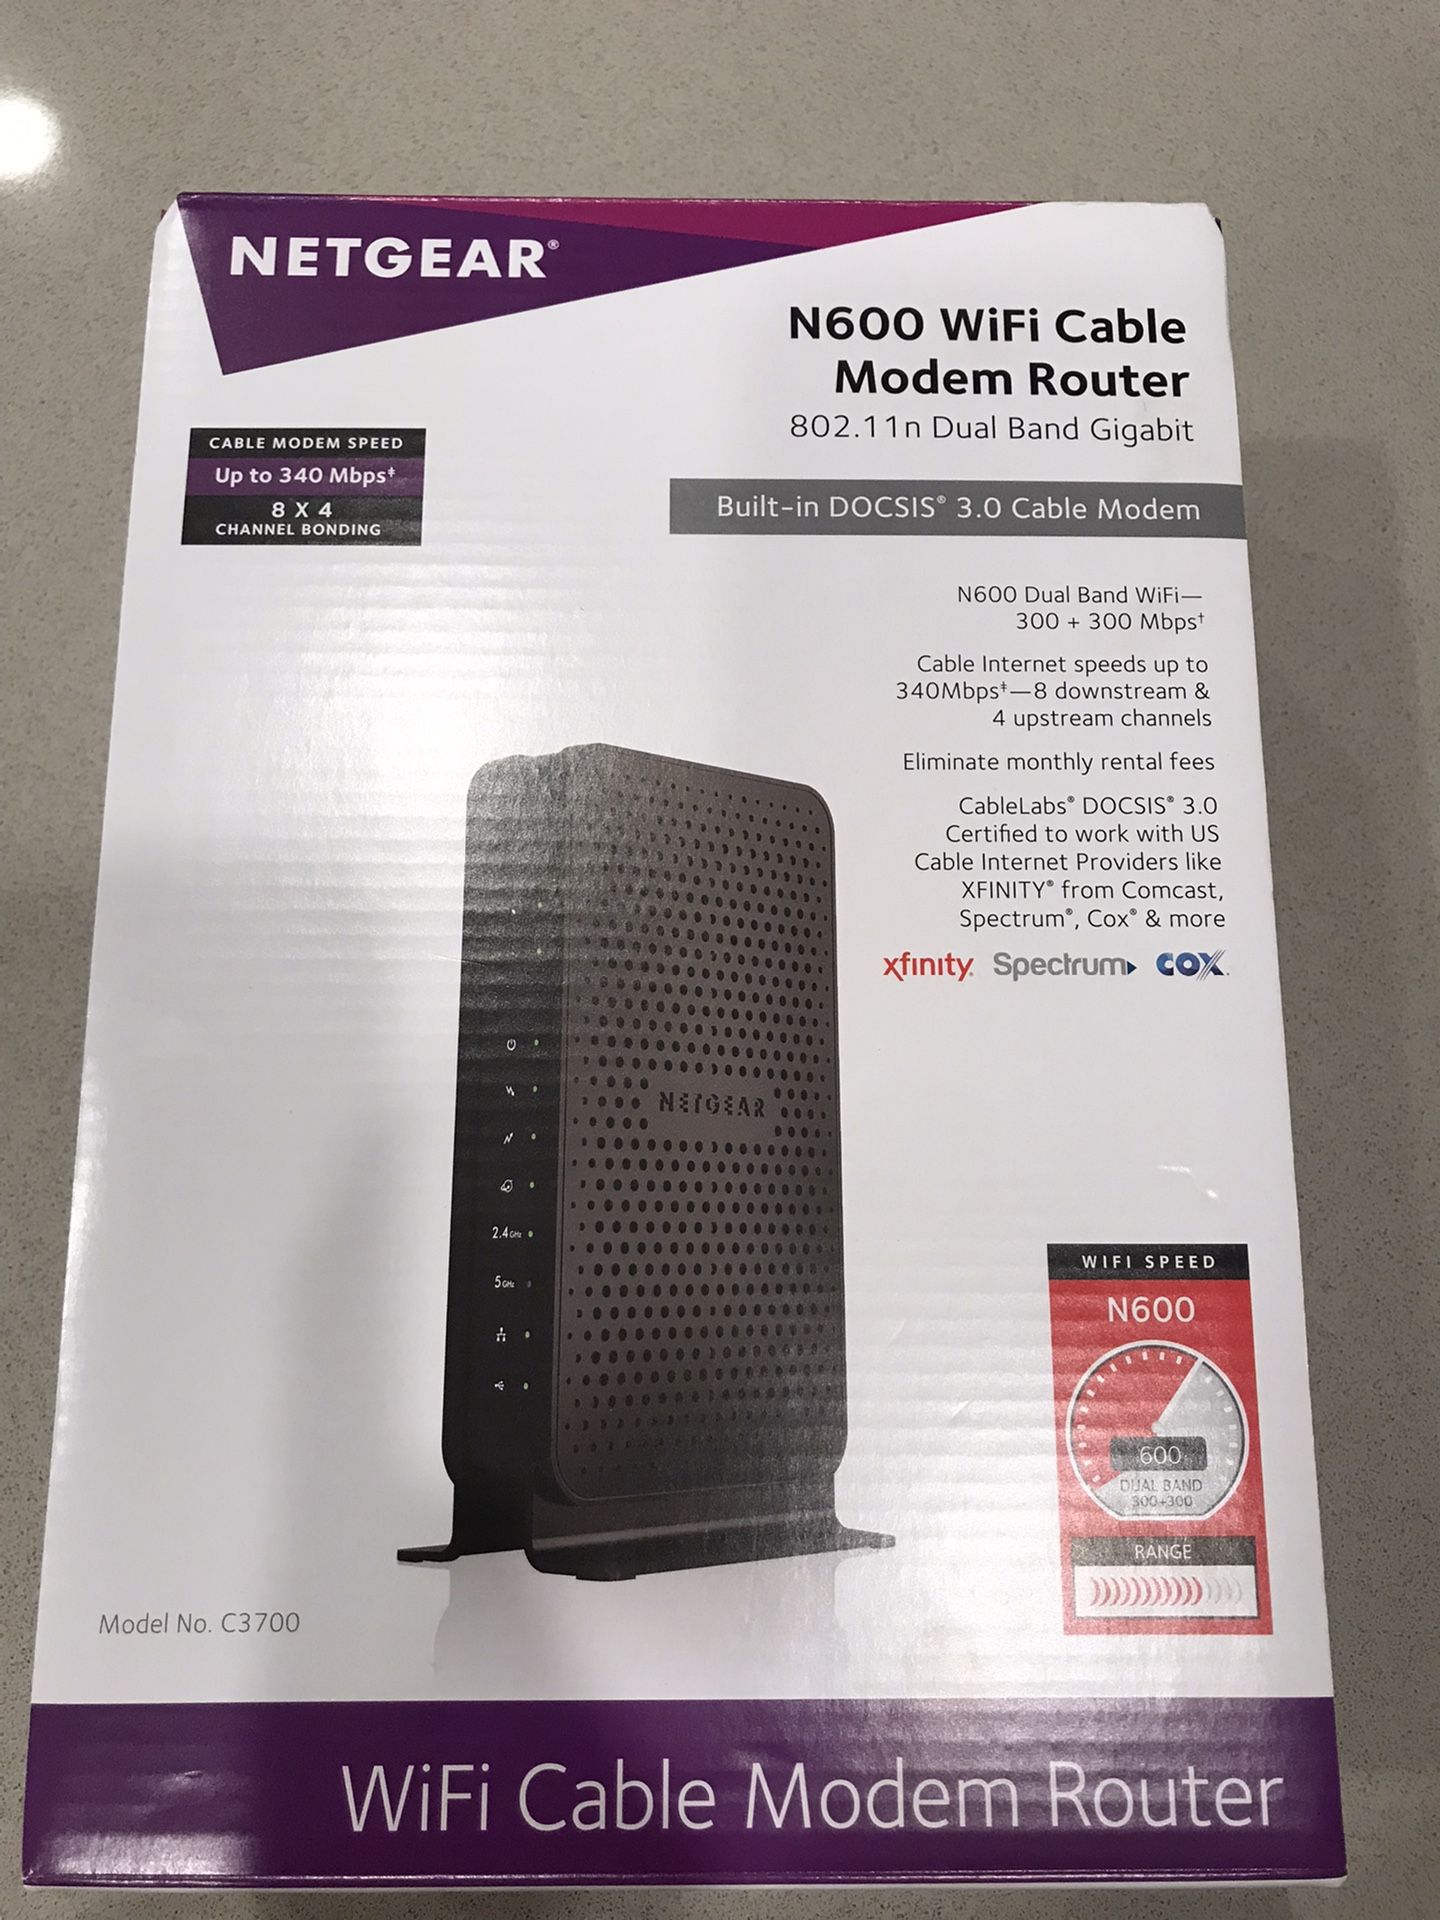 Netgear N600 WiFi Cable Model Router